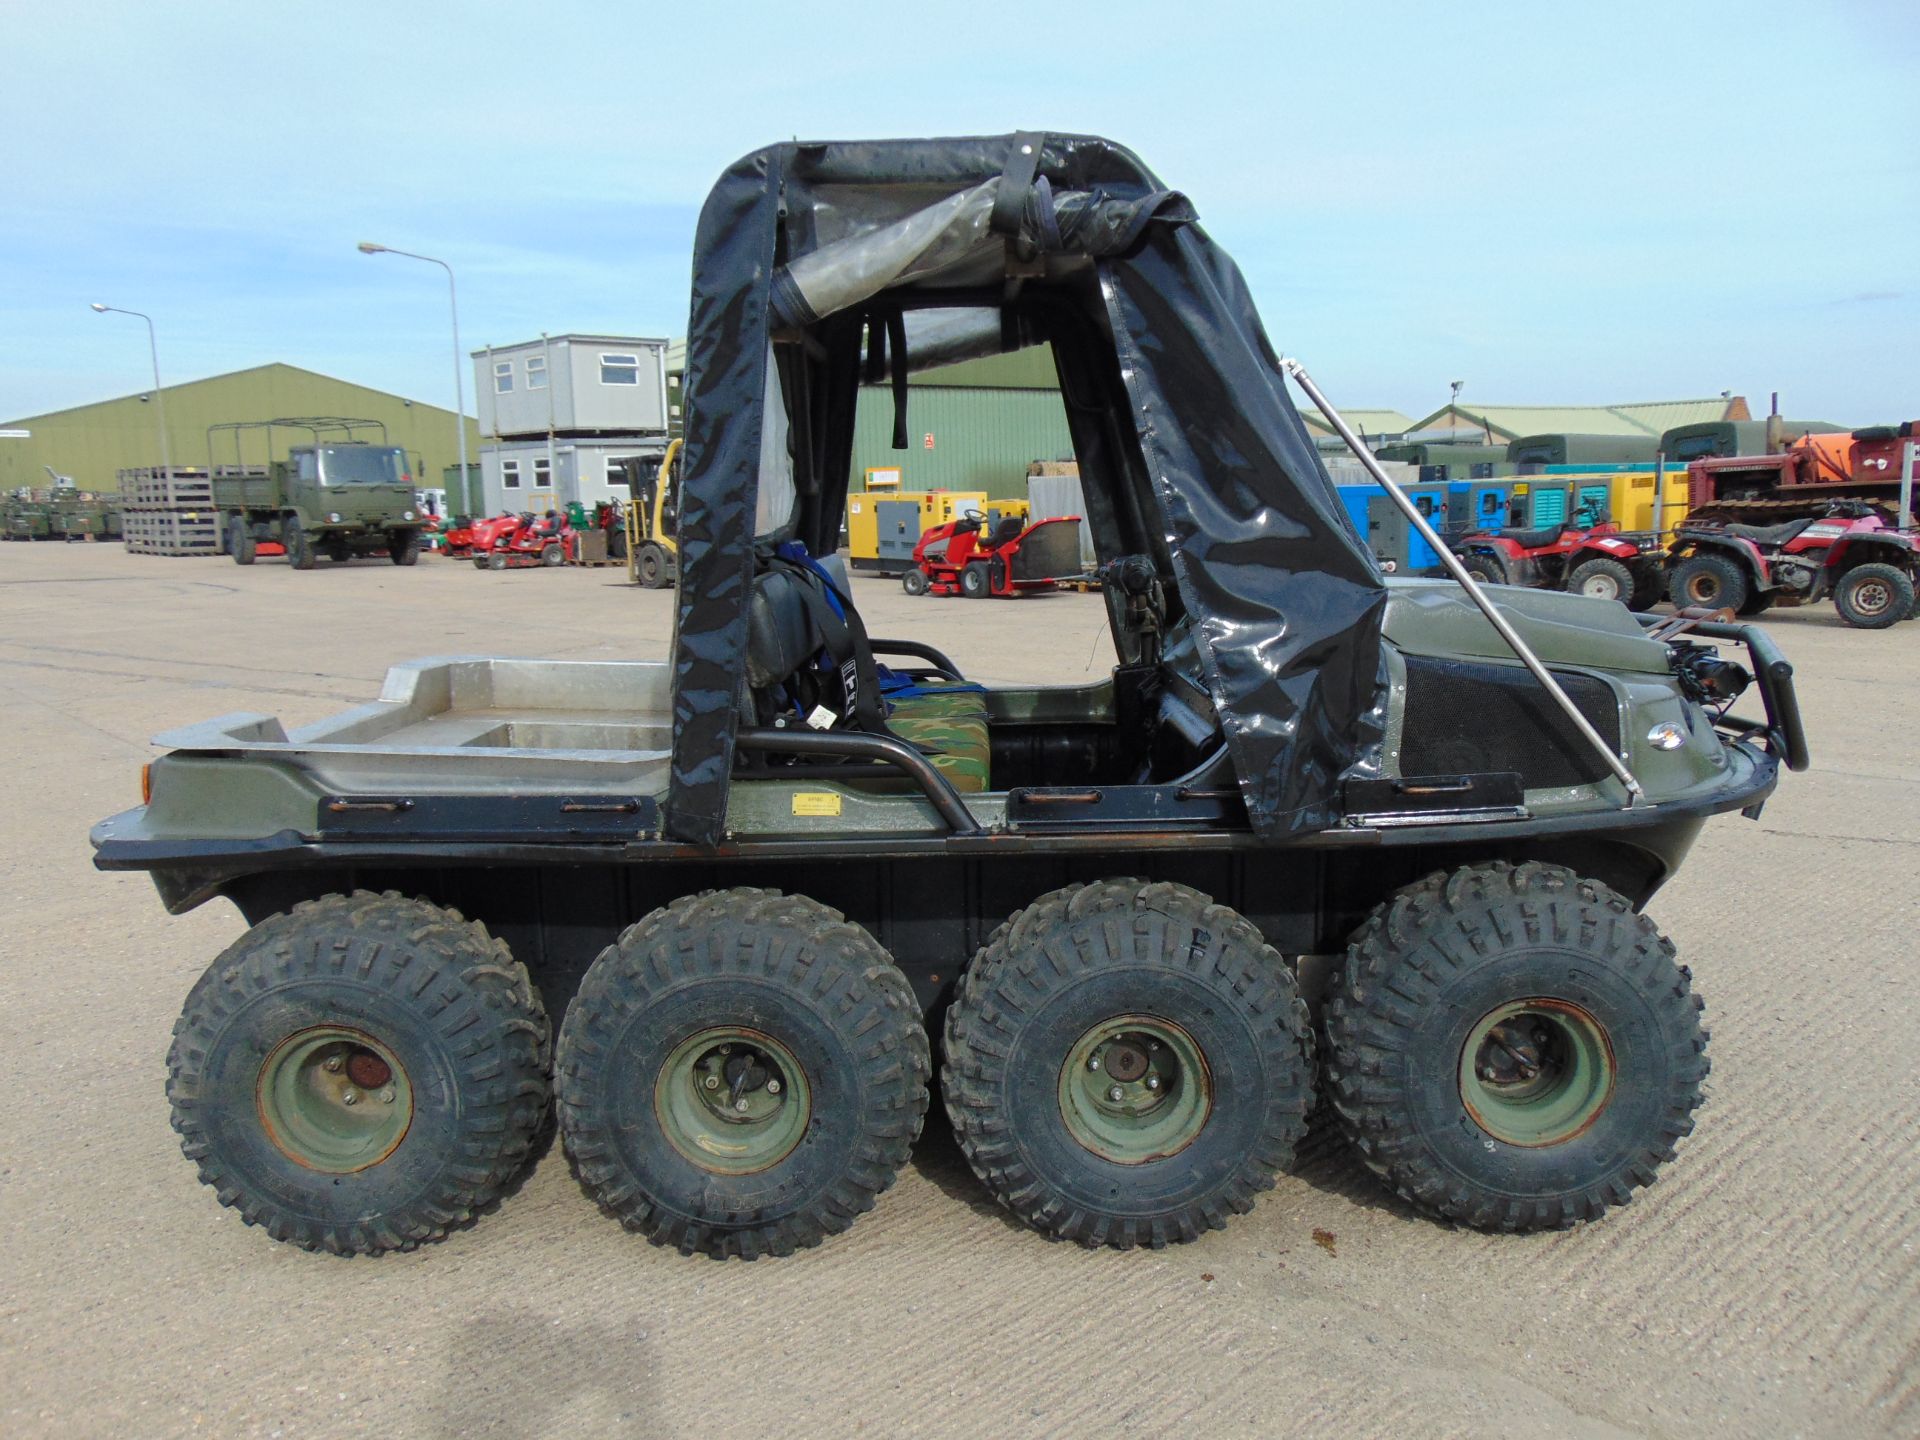 2013 Hunter 8x8 Amphibious Special Utility Vehicle - Image 4 of 23